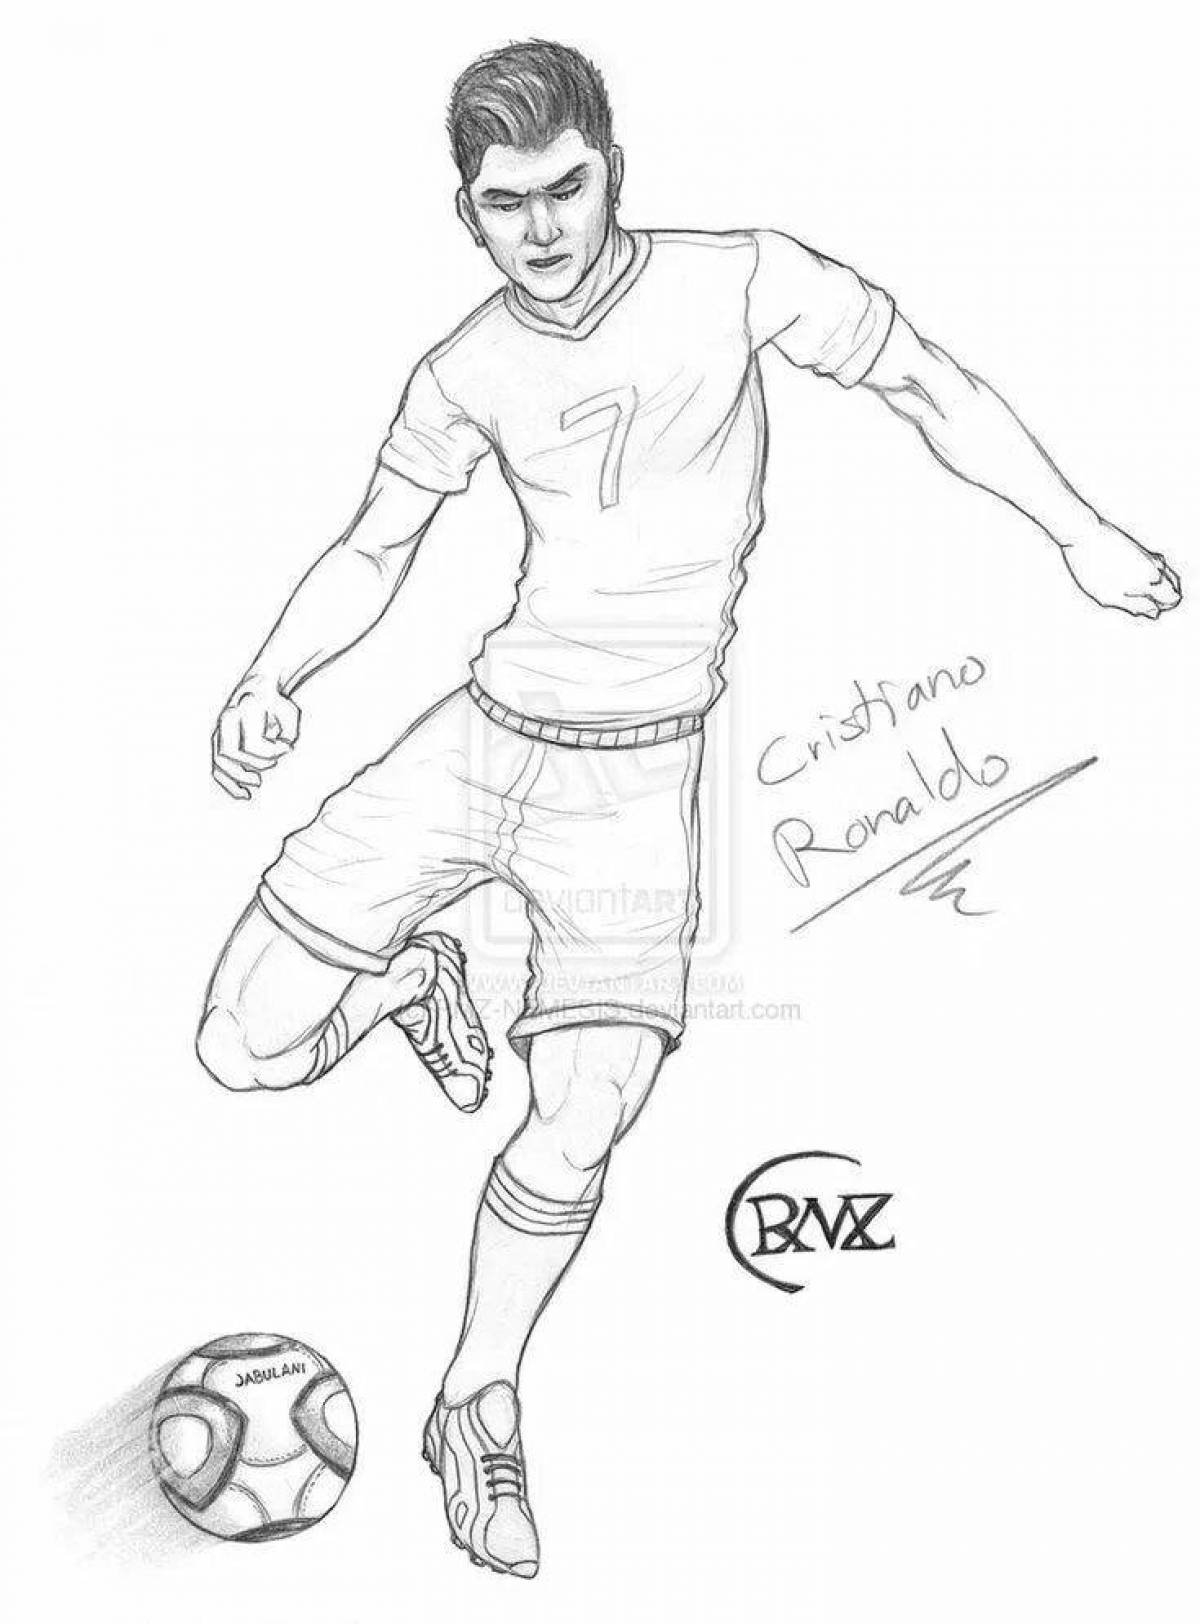 Coloring page great football player ronaldo